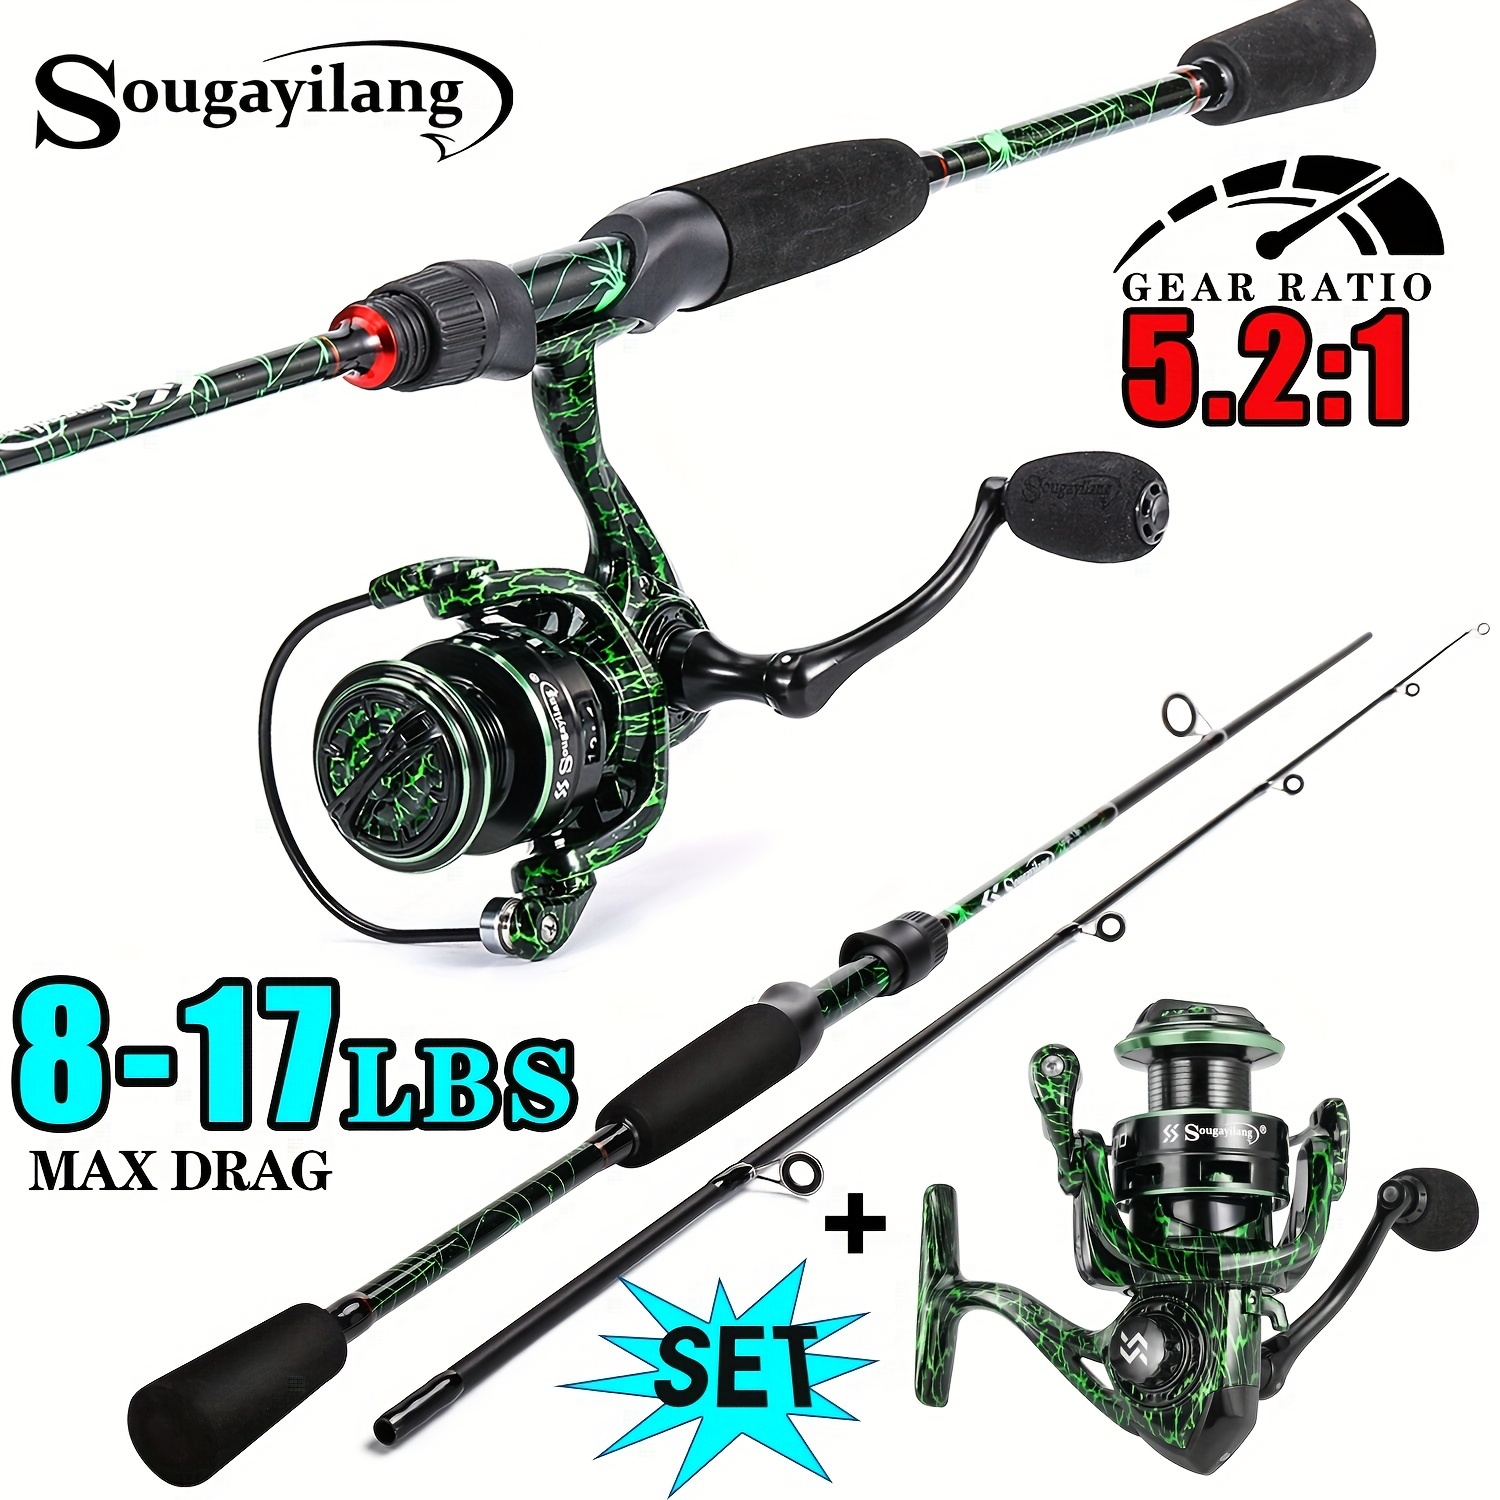 Sougayilang Fishing Rod Reel Combos, 1.8m/6ft Ultralight Carbon 2 Sections  Fishing Rod, 12+1 BB 5.2:1 Gear Ratio Spinning Reel, Fishing Tackle For Fre